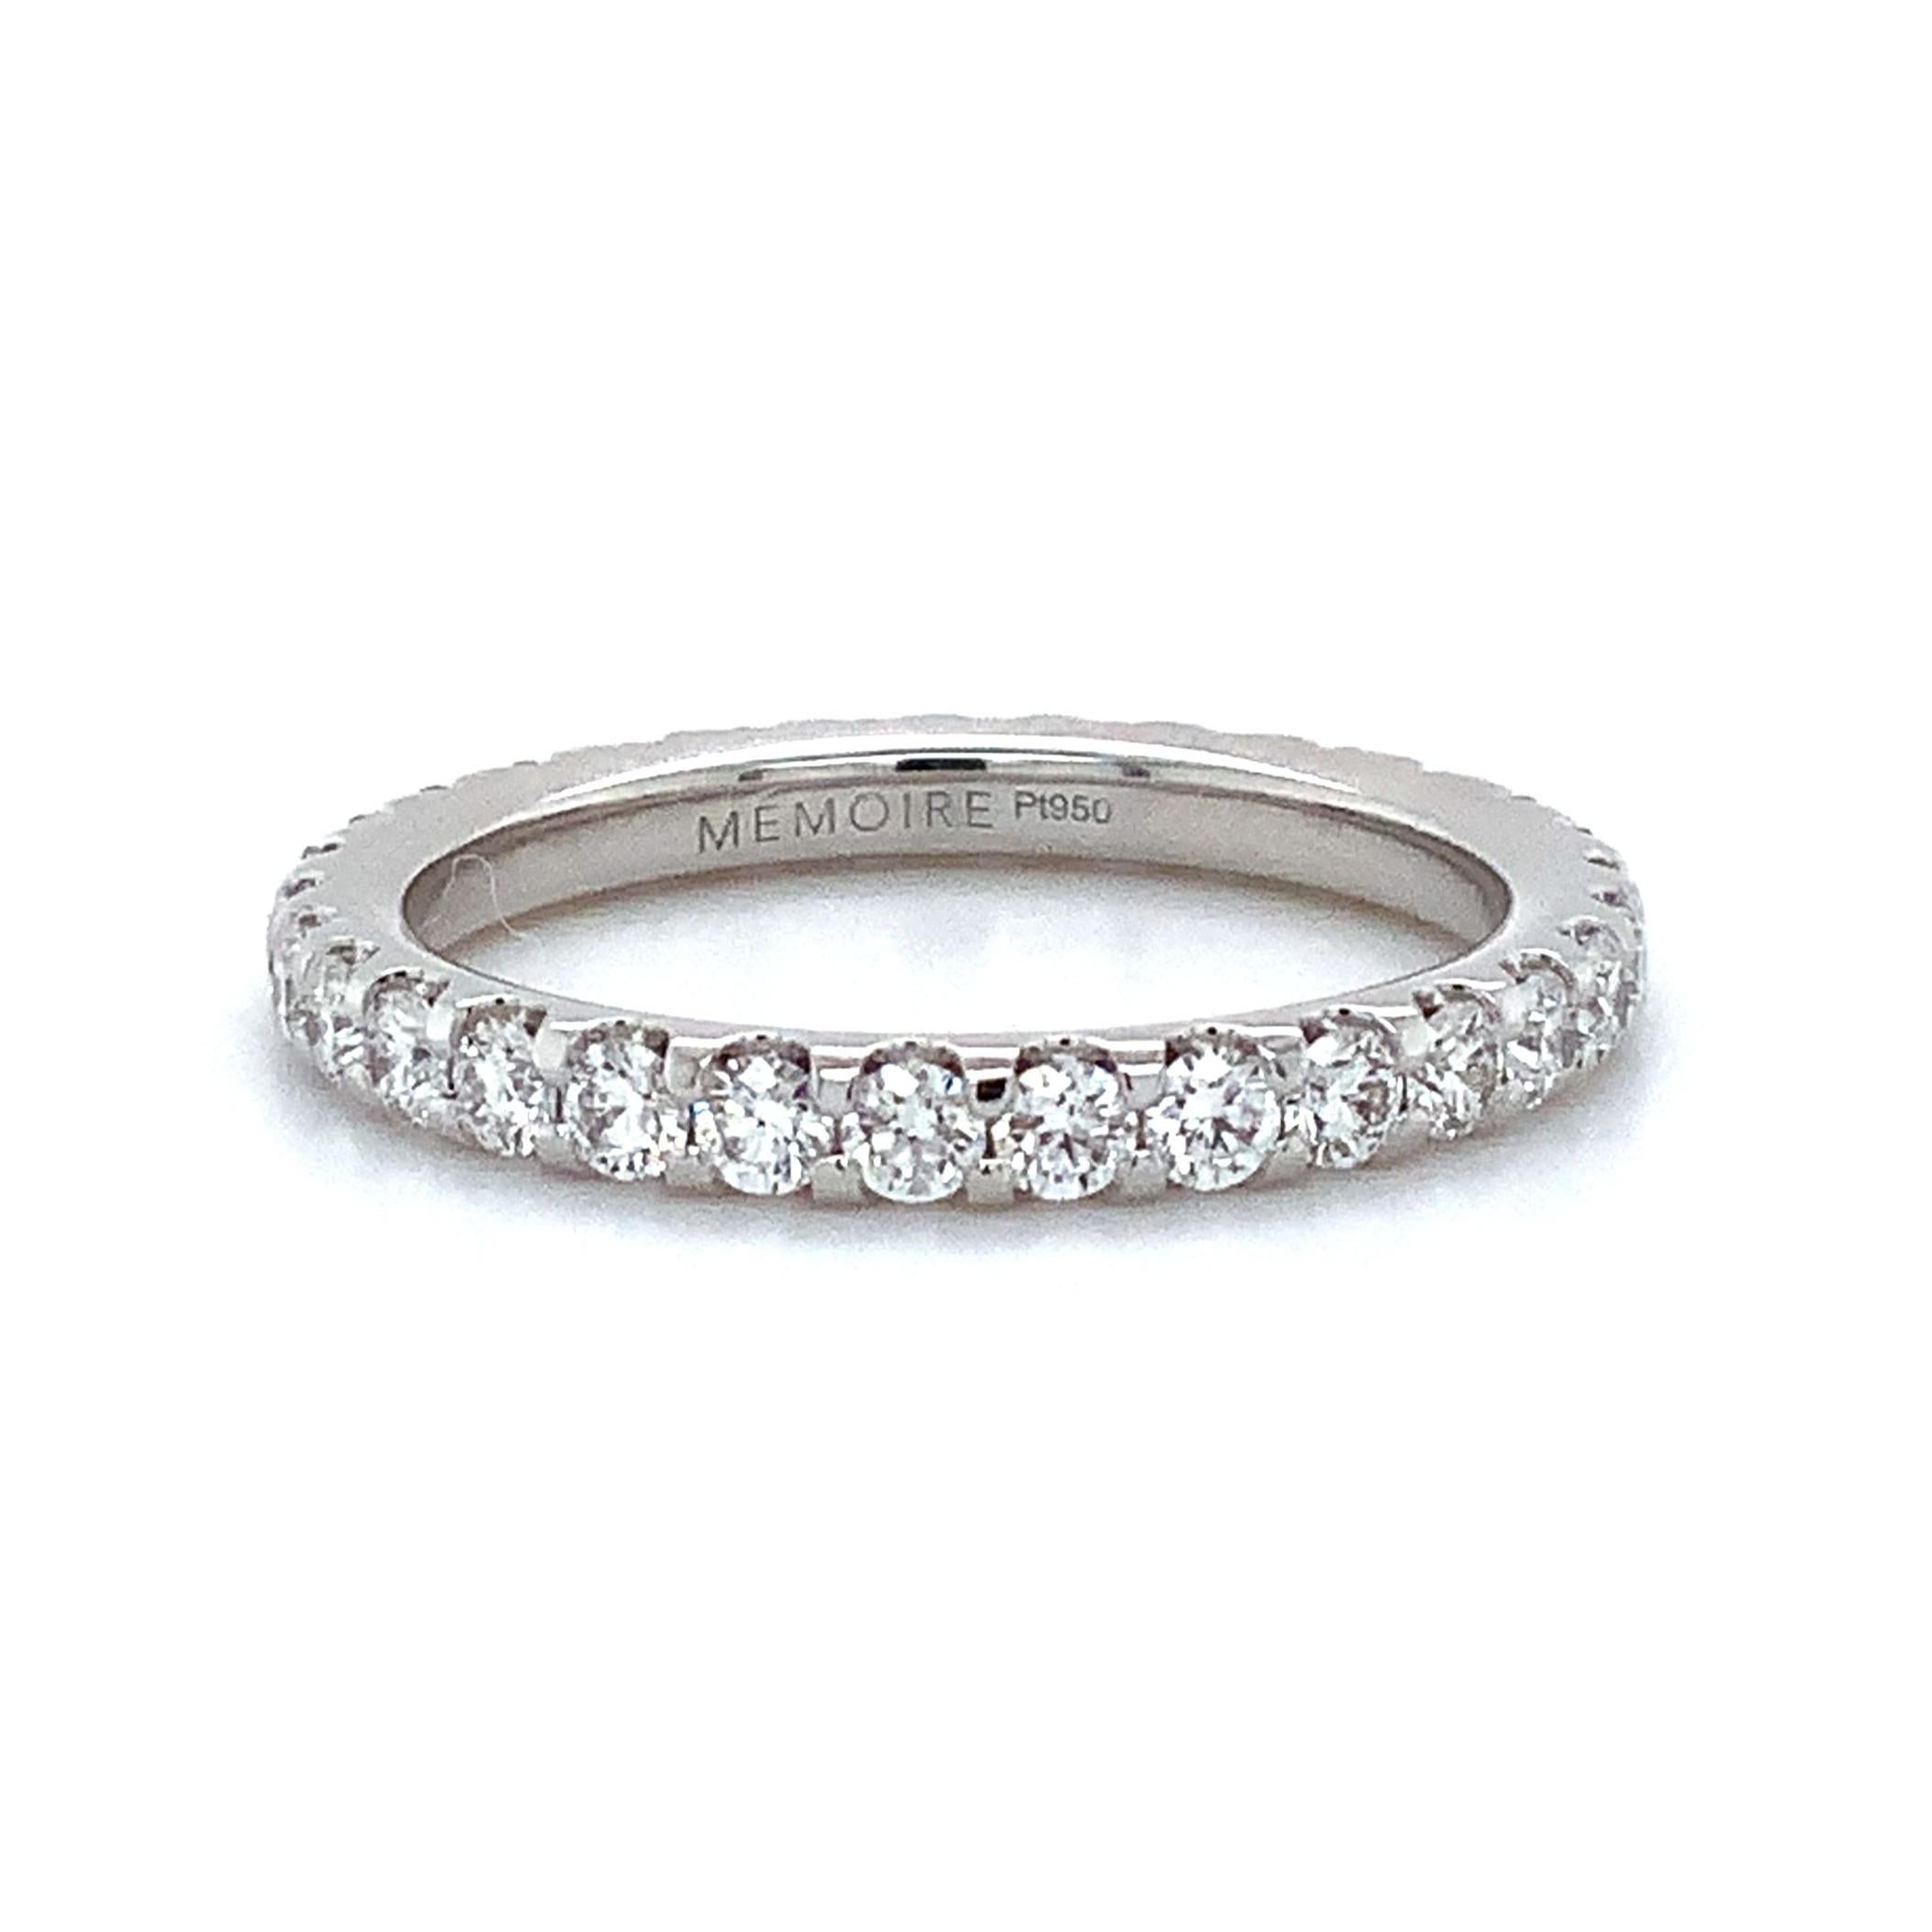 The Memoire Odessa Collection Diamond Eternity Band Set in Platinum features 30 Round Brilliant Cut Diamonds totaling 1.04ct. tw. The stones are F Color with VS1 Clarity. This ring is 2.45mm wide and weighs 3.6 grams; it is available in a finger